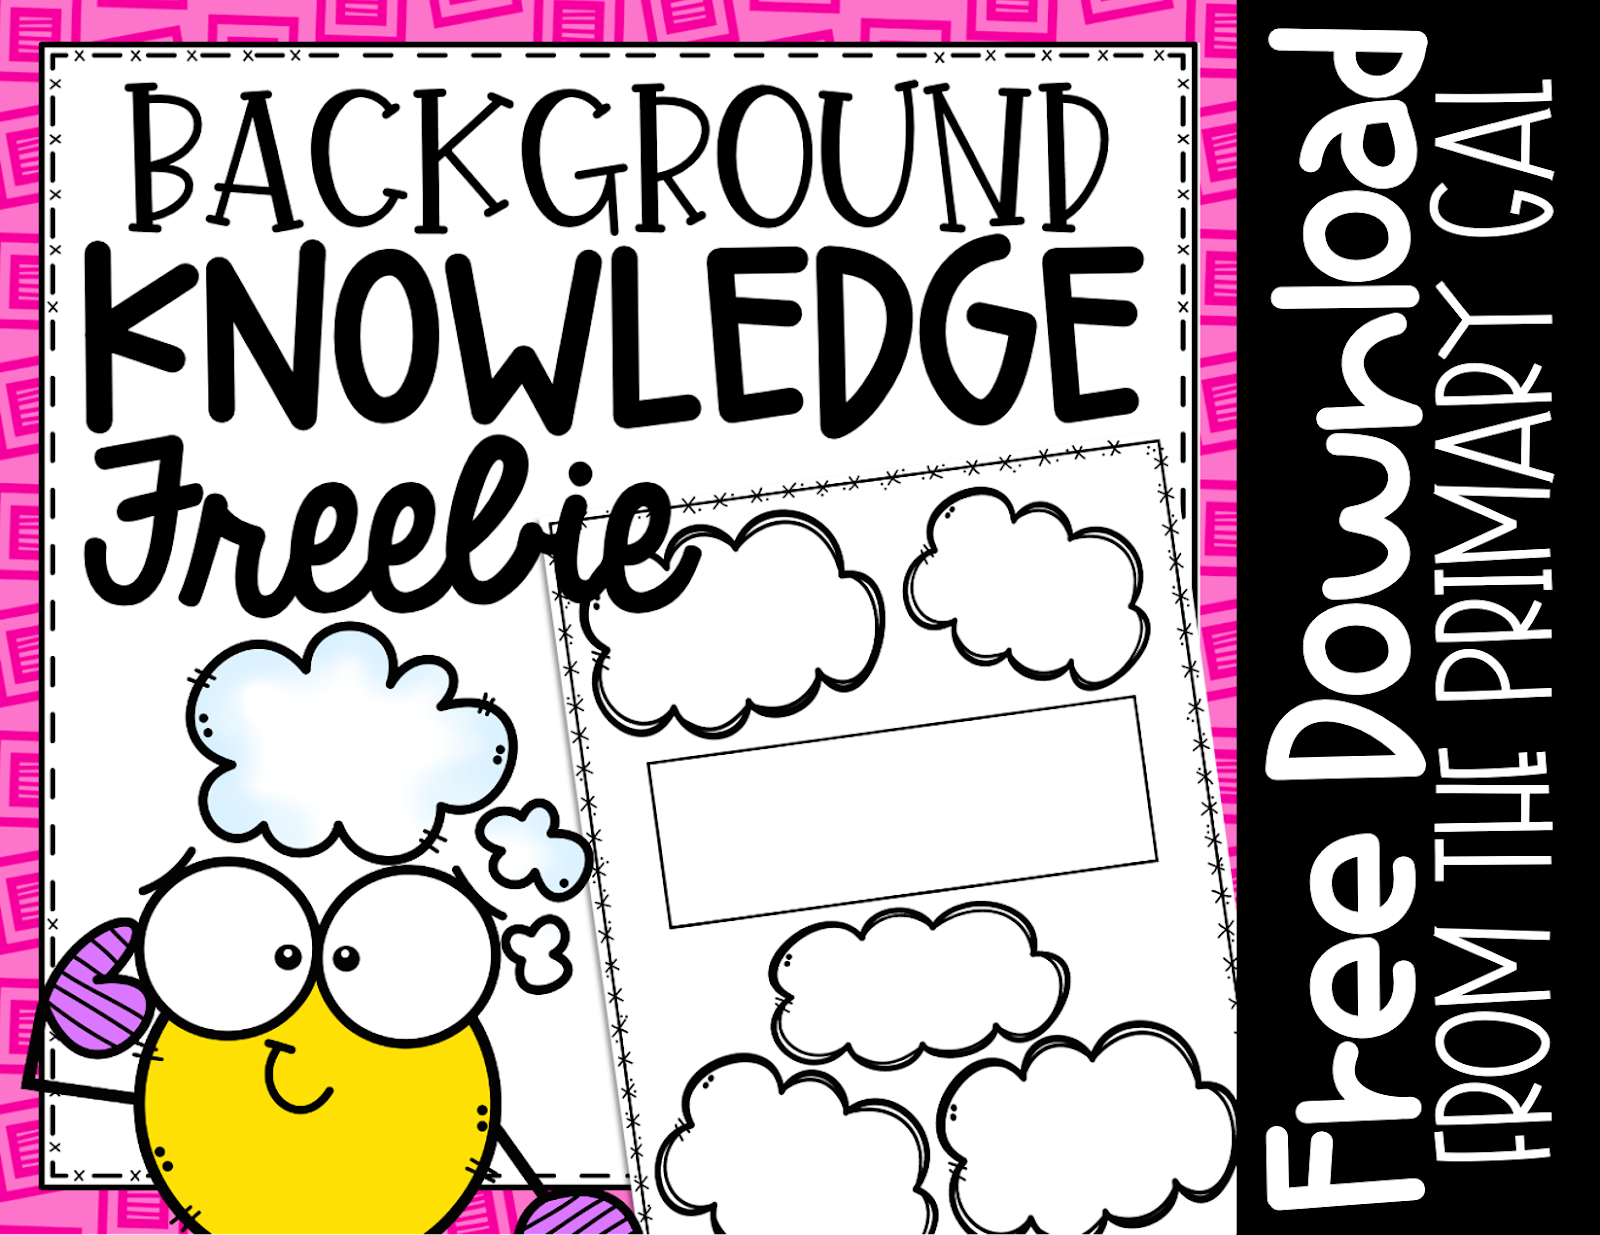 Click HERE for your Background Knowledge FREEBIE!